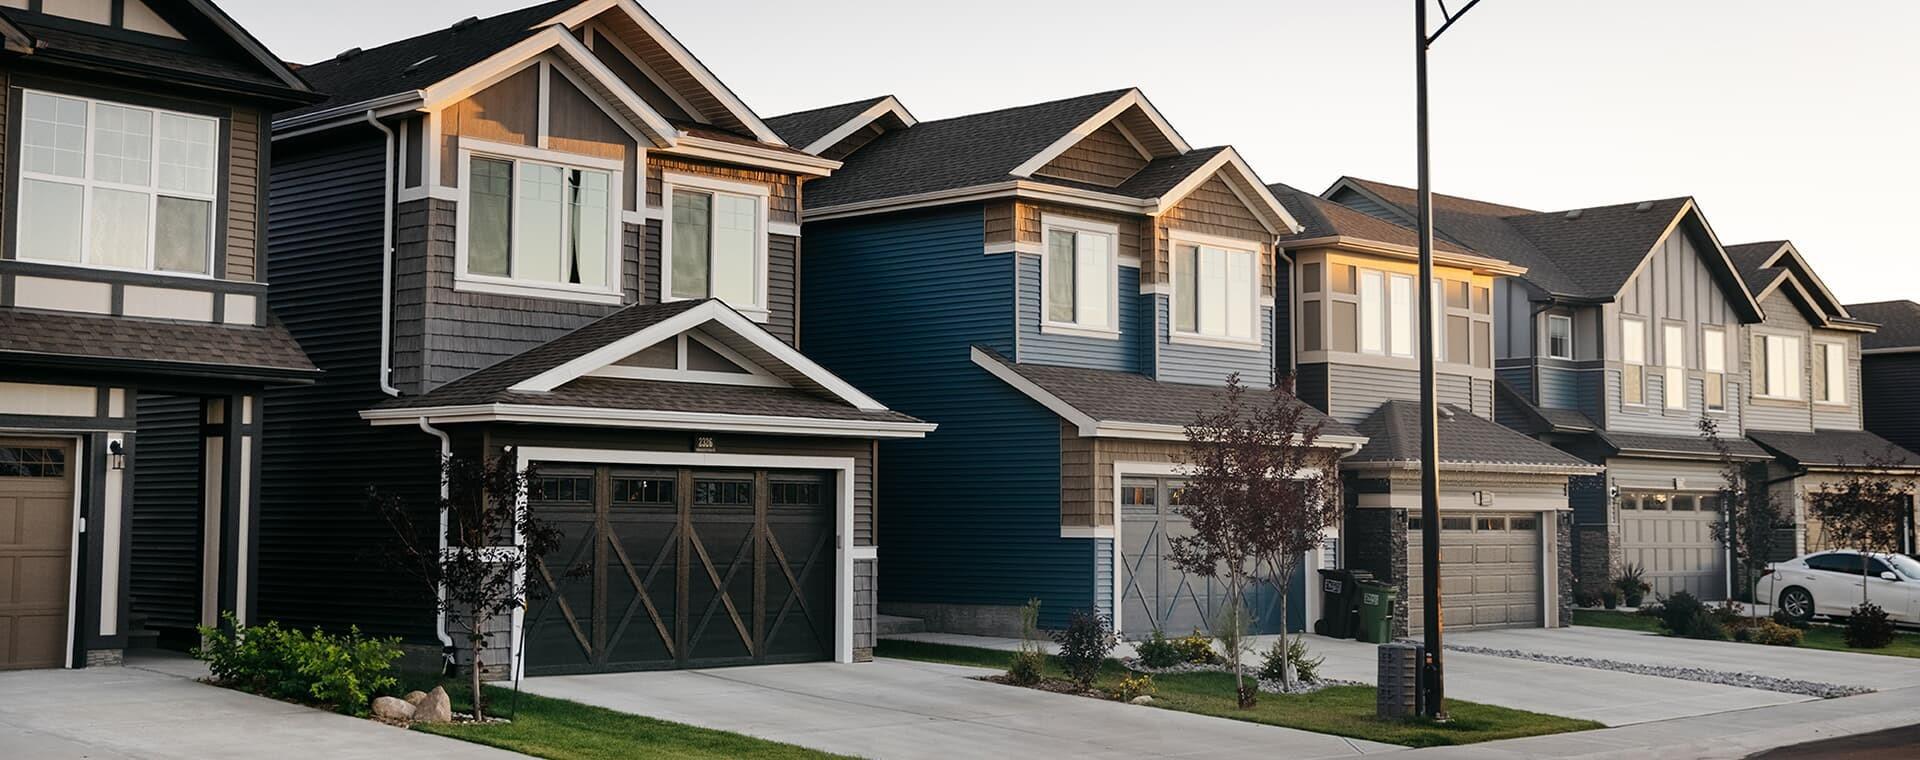 How To Choose A Good Home Builder In Edmonton?